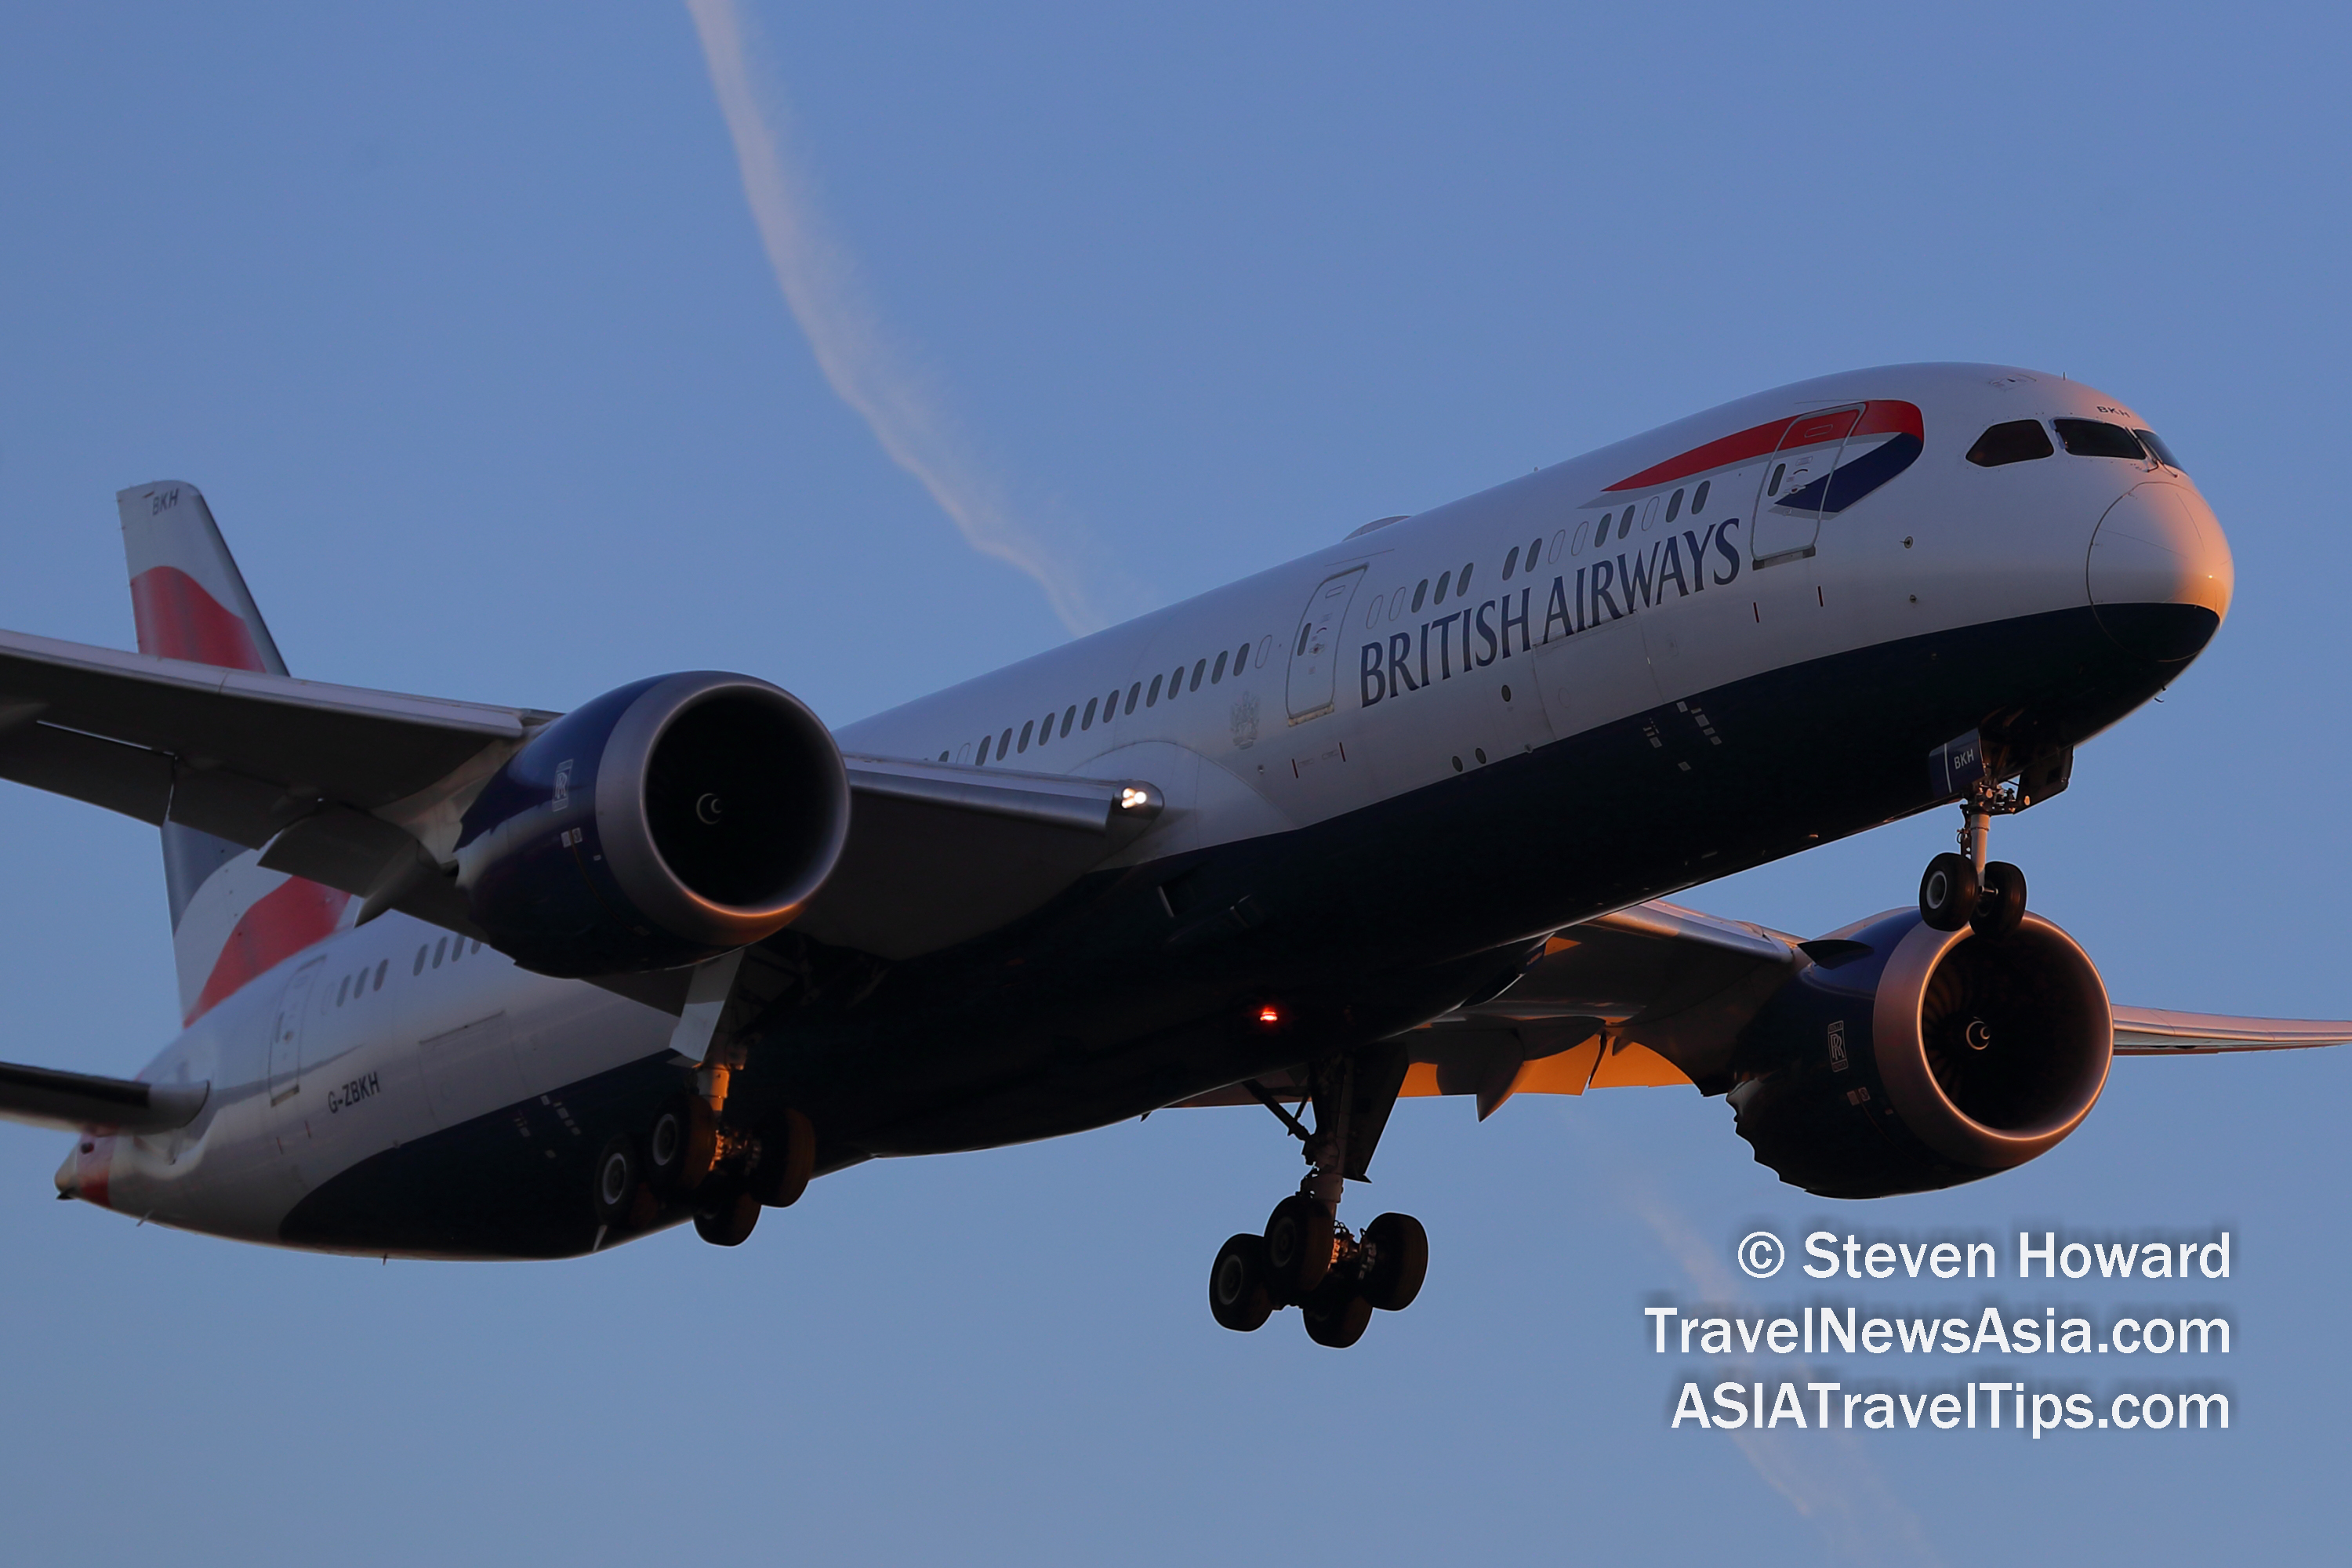 British Airways Boeing 787-9 reg: G-ZBKH. Picture by Steven Howard of TravelNewsAsia.com Click to enlarge.